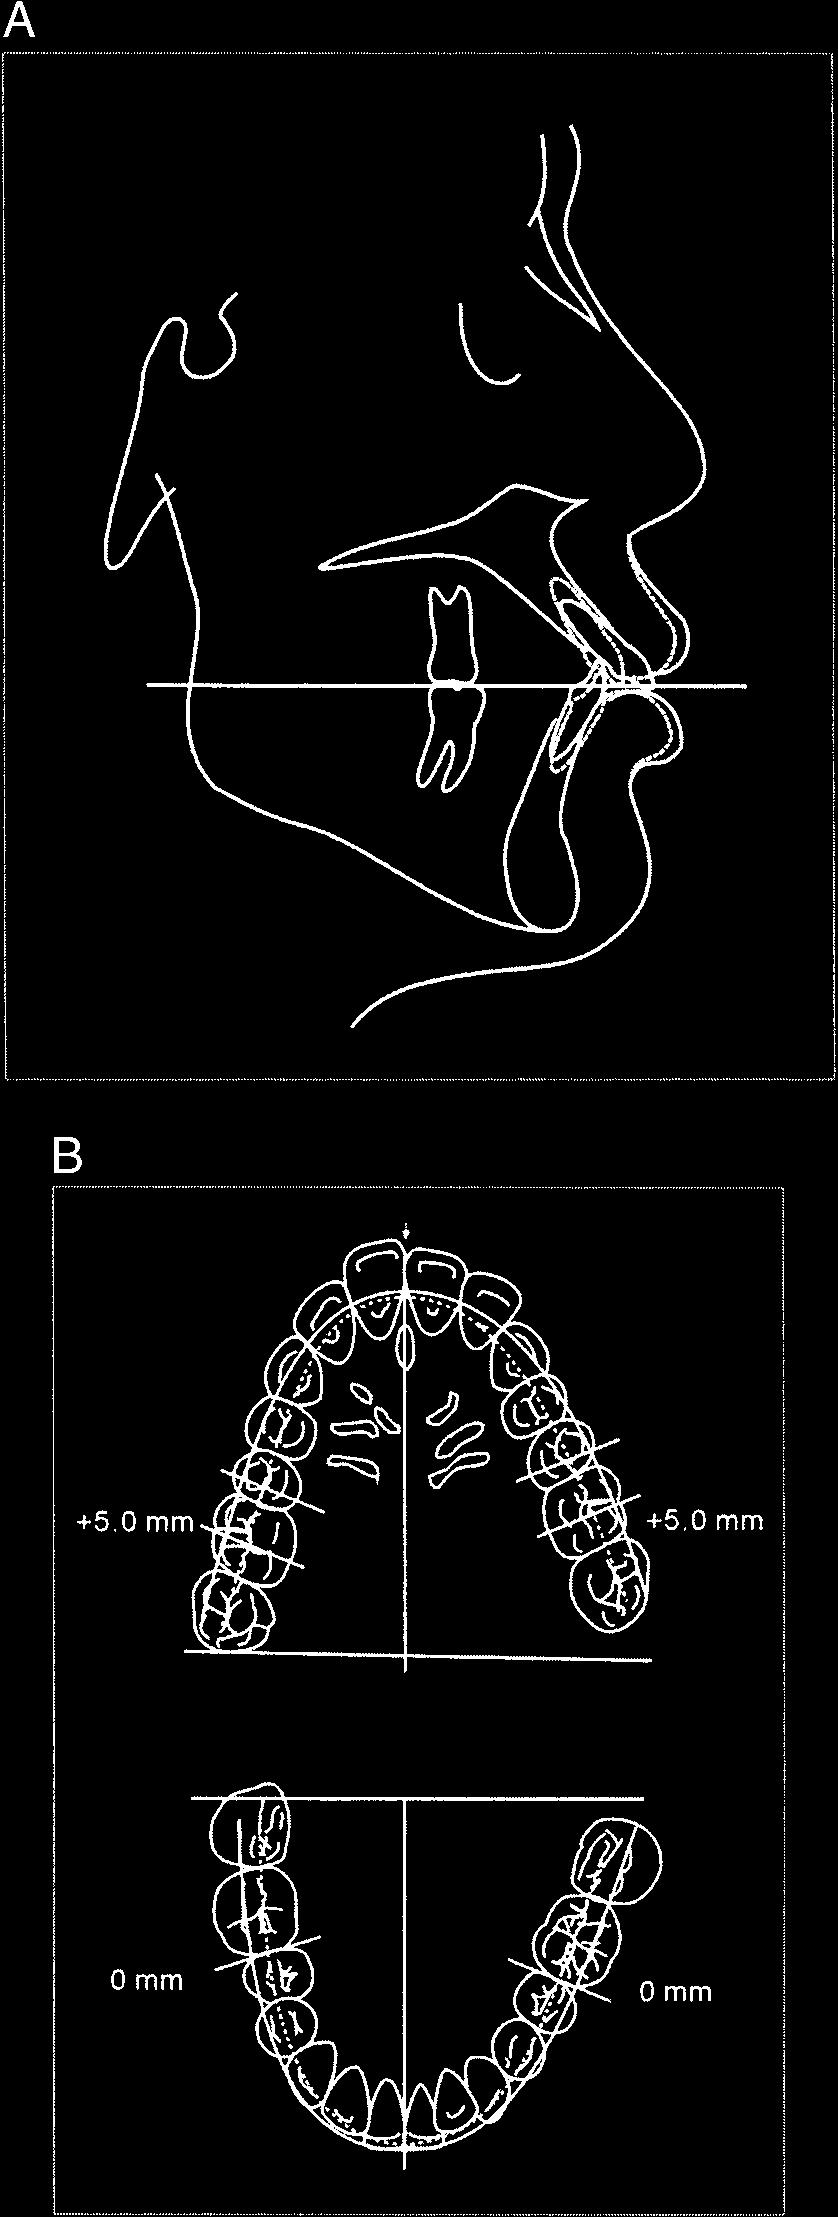 196 CHOY, PAE, KIM, PARK, BURSTONE FIGURE 9. (A) Before intrusion. (B) After intrusion. Intrusion was performed along the long axis of the anterior teeth to the same level of the canine.